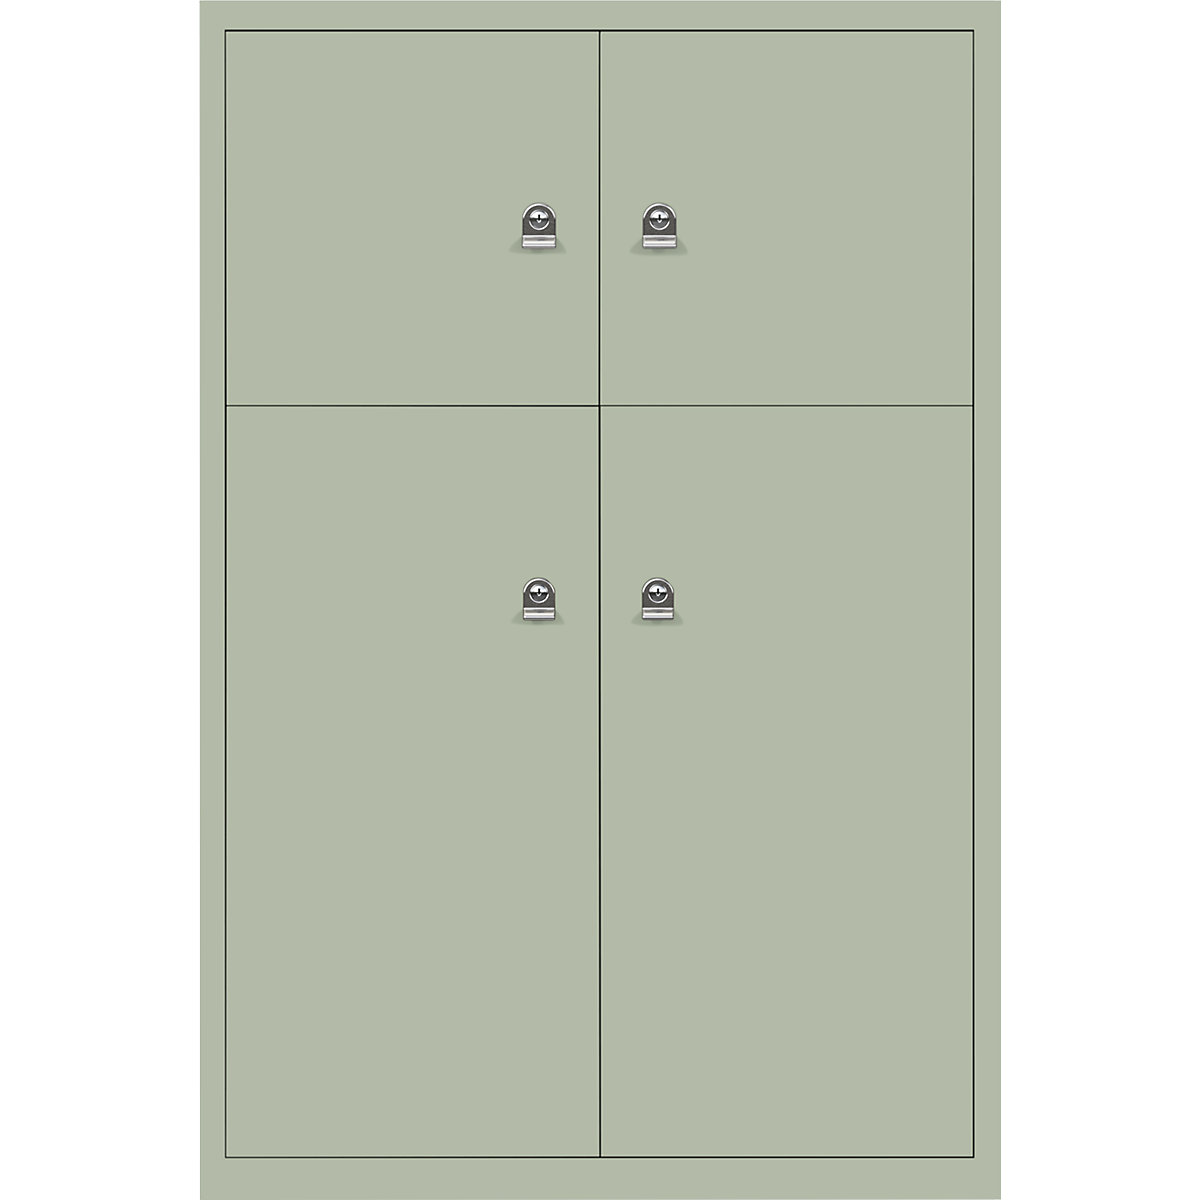 BISLEY – LateralFile™ lodge, with 4 lockable compartments, height 2 x 375 mm, 2 x 755 mm, regent